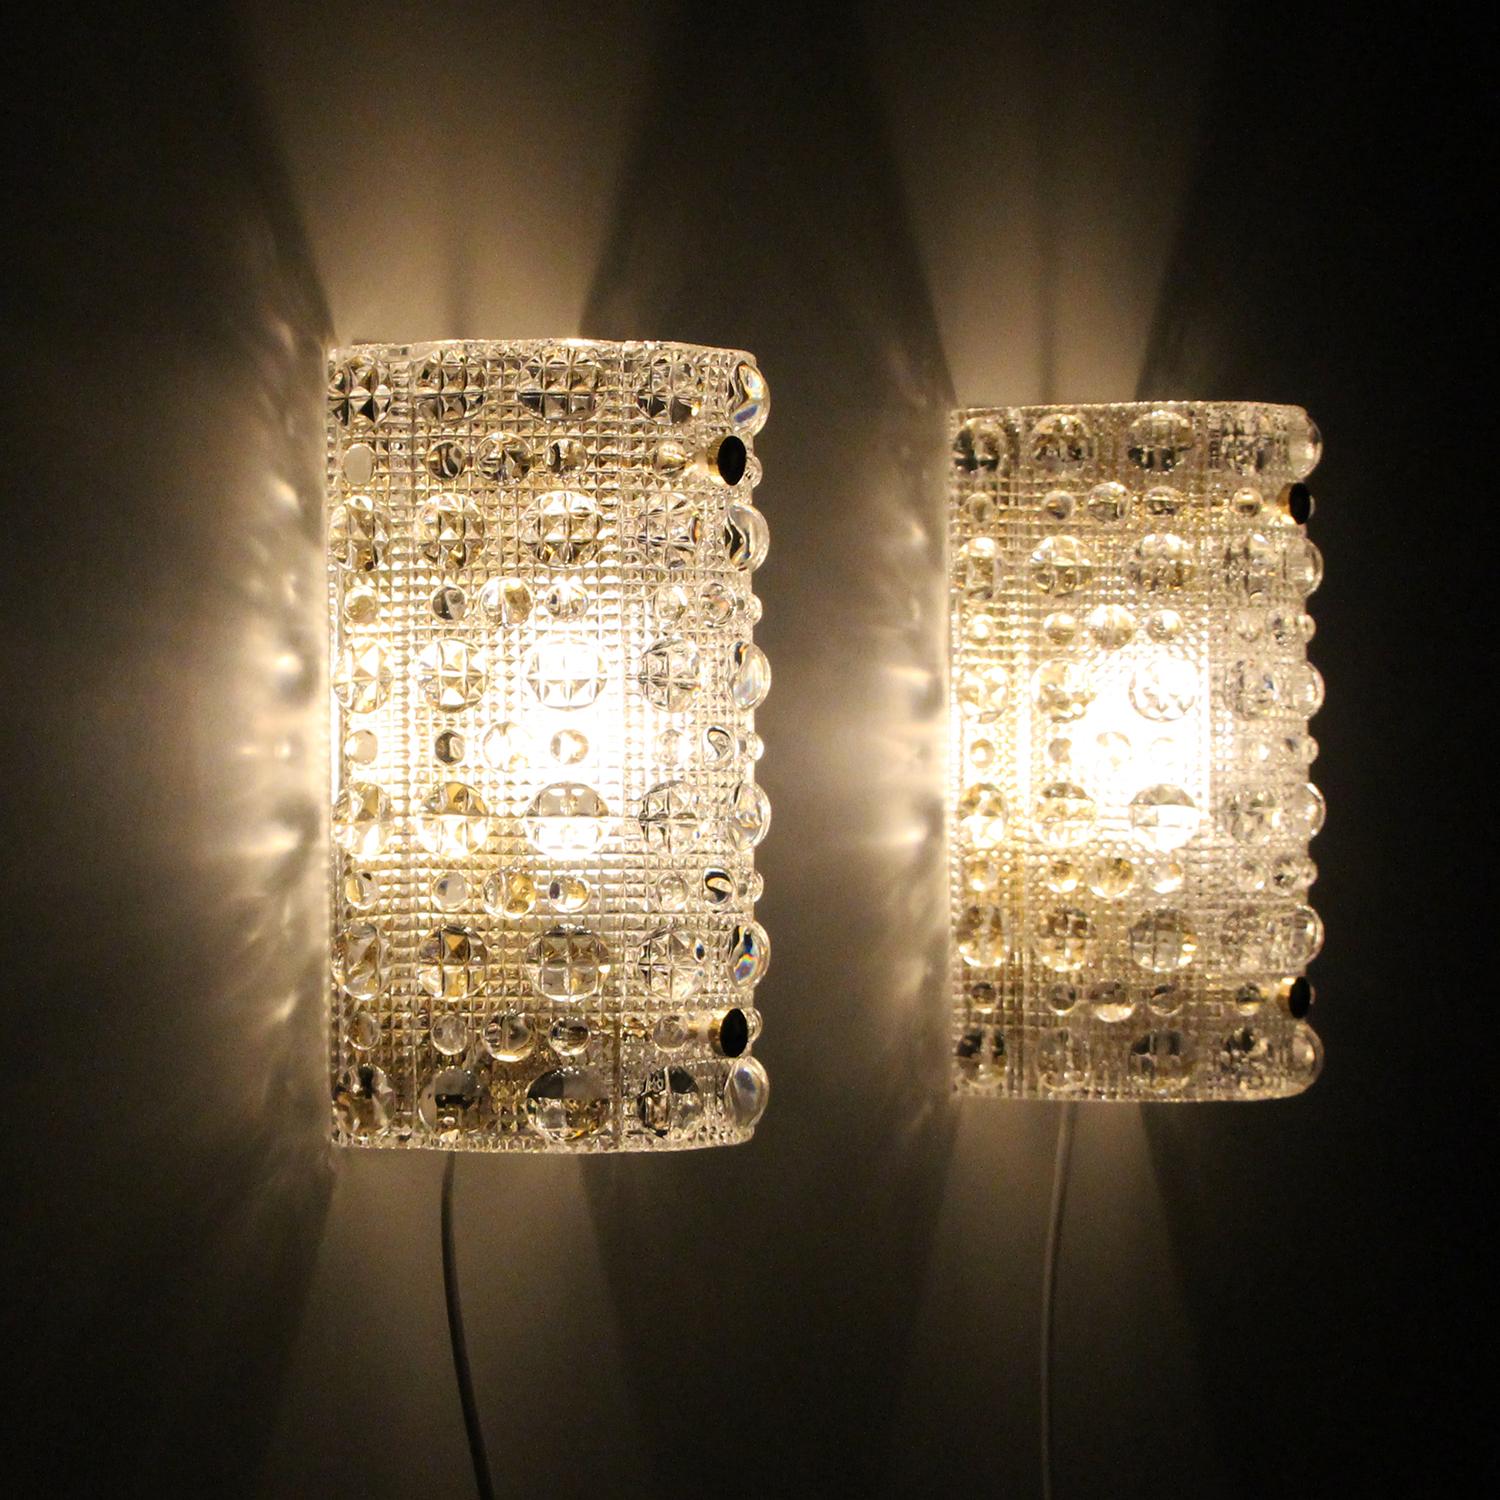 Orrefors Venus (pair), crystal sconces by LYFA/Orrefors, in the late 1950s-early 1960s, absolutely gorgeous pair of crystal wall lights in excellent vintage condition.

Each of these beautiful sconces are made of a thick mold-blown clear crystal